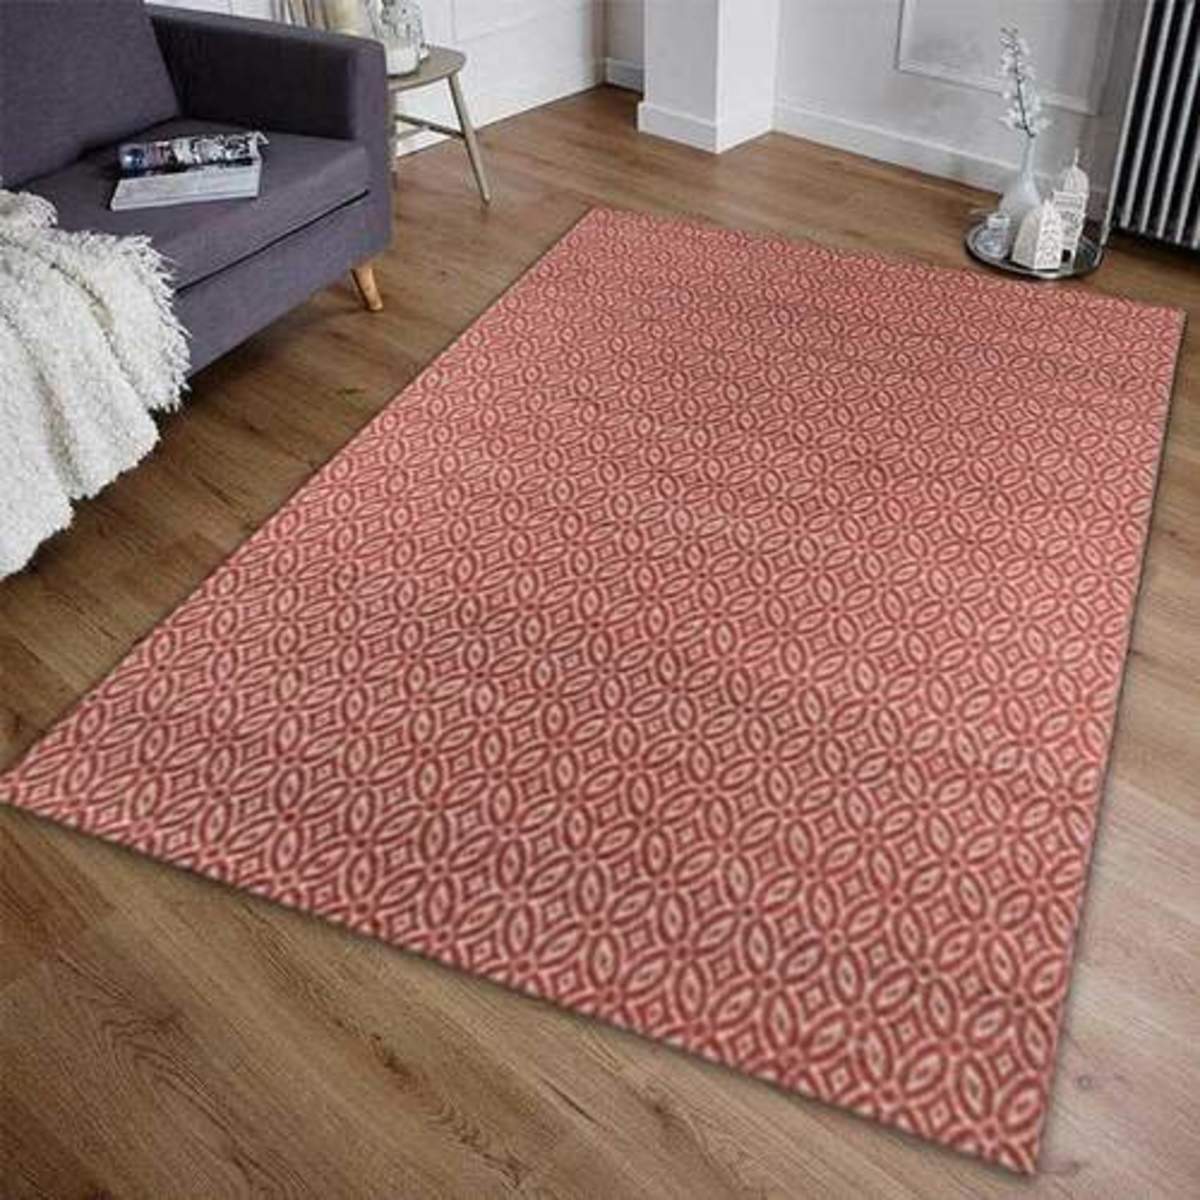 Jute Rugs and Its Unique Features